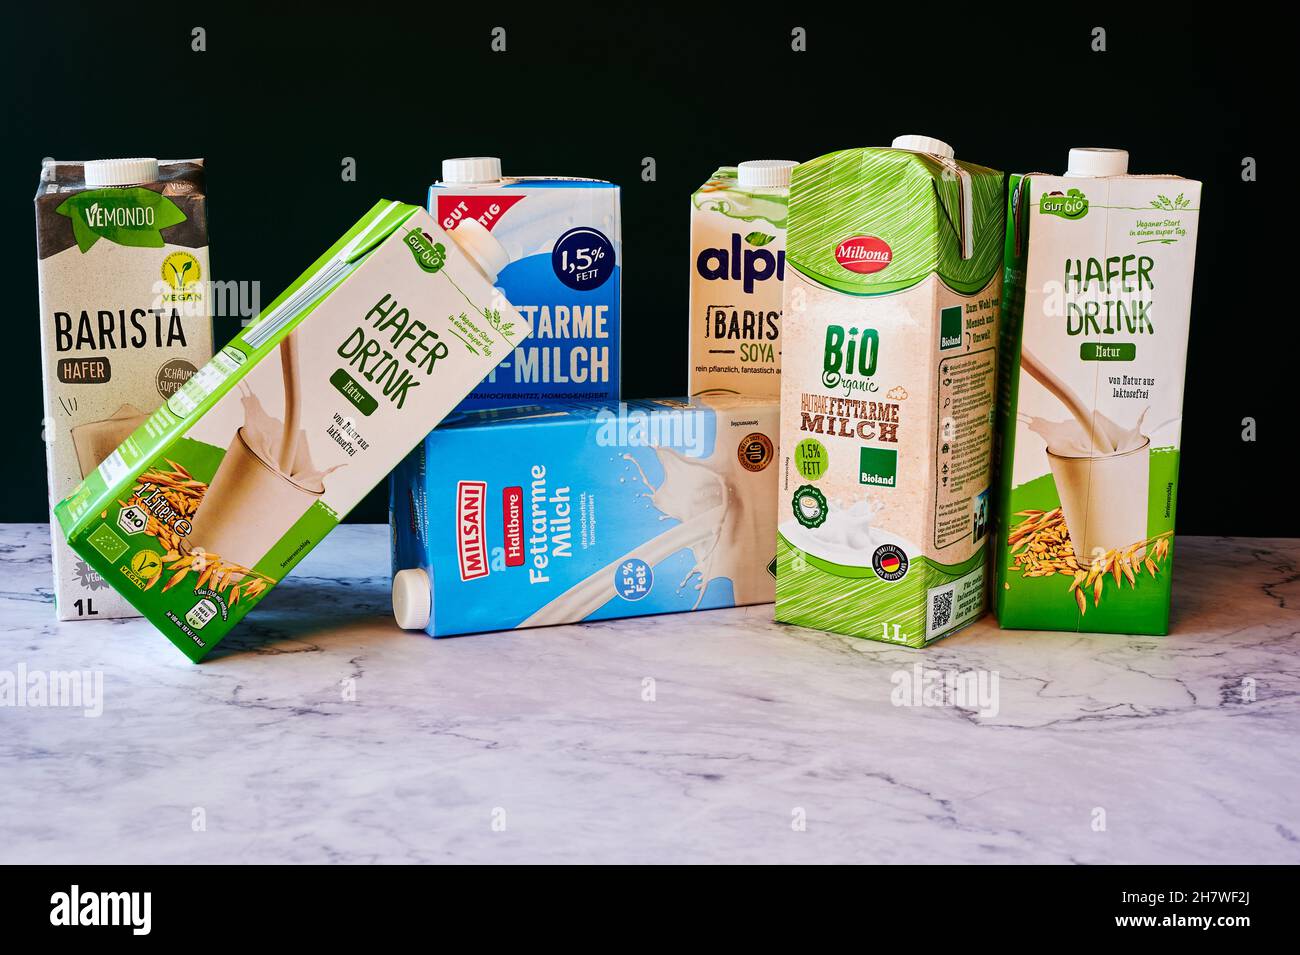 Berlin, oats - made beverages different - View Stock of Alamy of packs milk, milk from 2021: and Germany cow\'s Photo soy 25, November